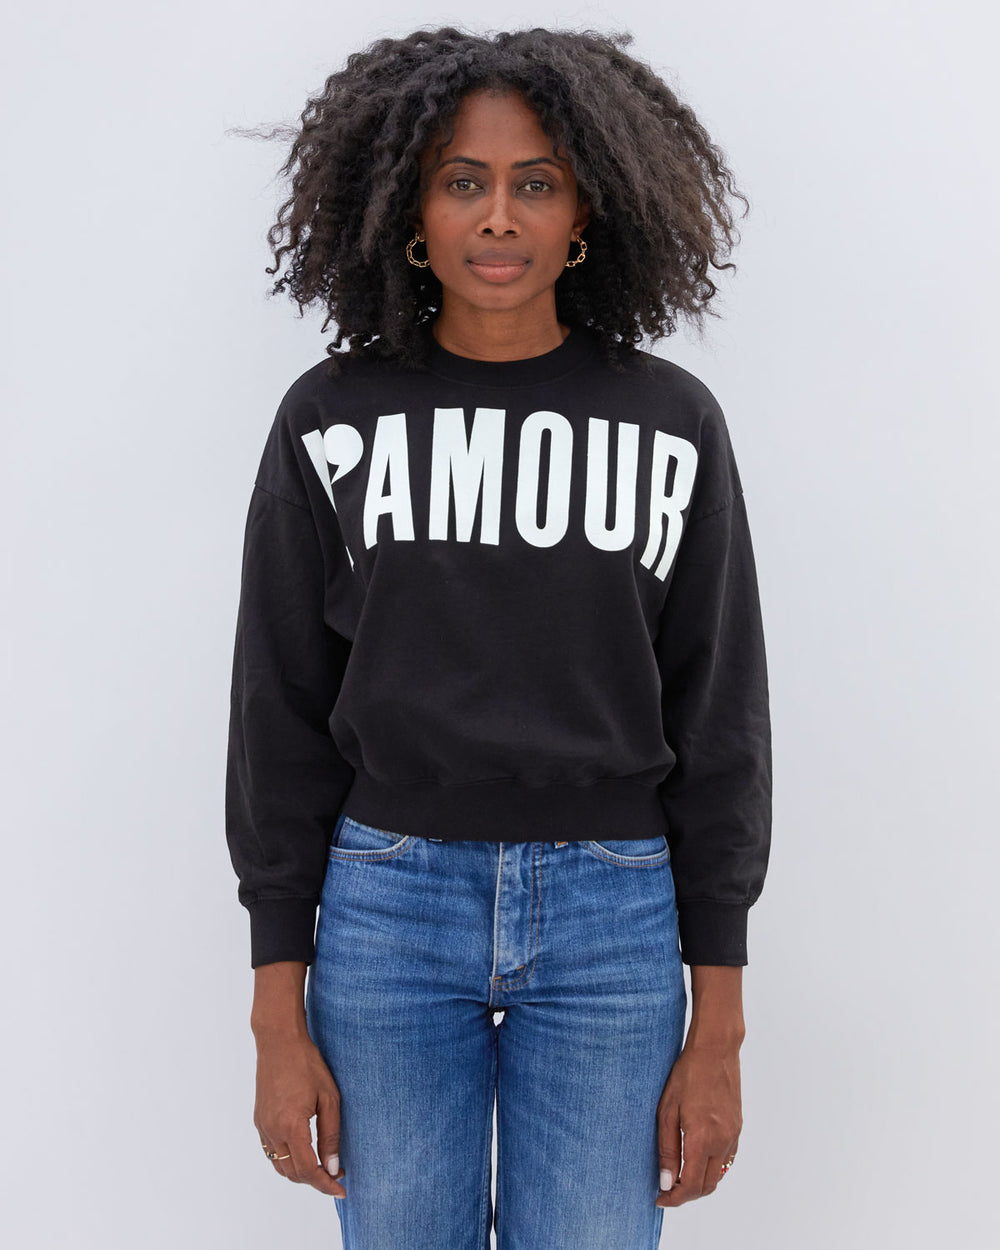 Mecca wearing the Black with Cream L'Amour Le Drop Sweatshirt untucked with jeans